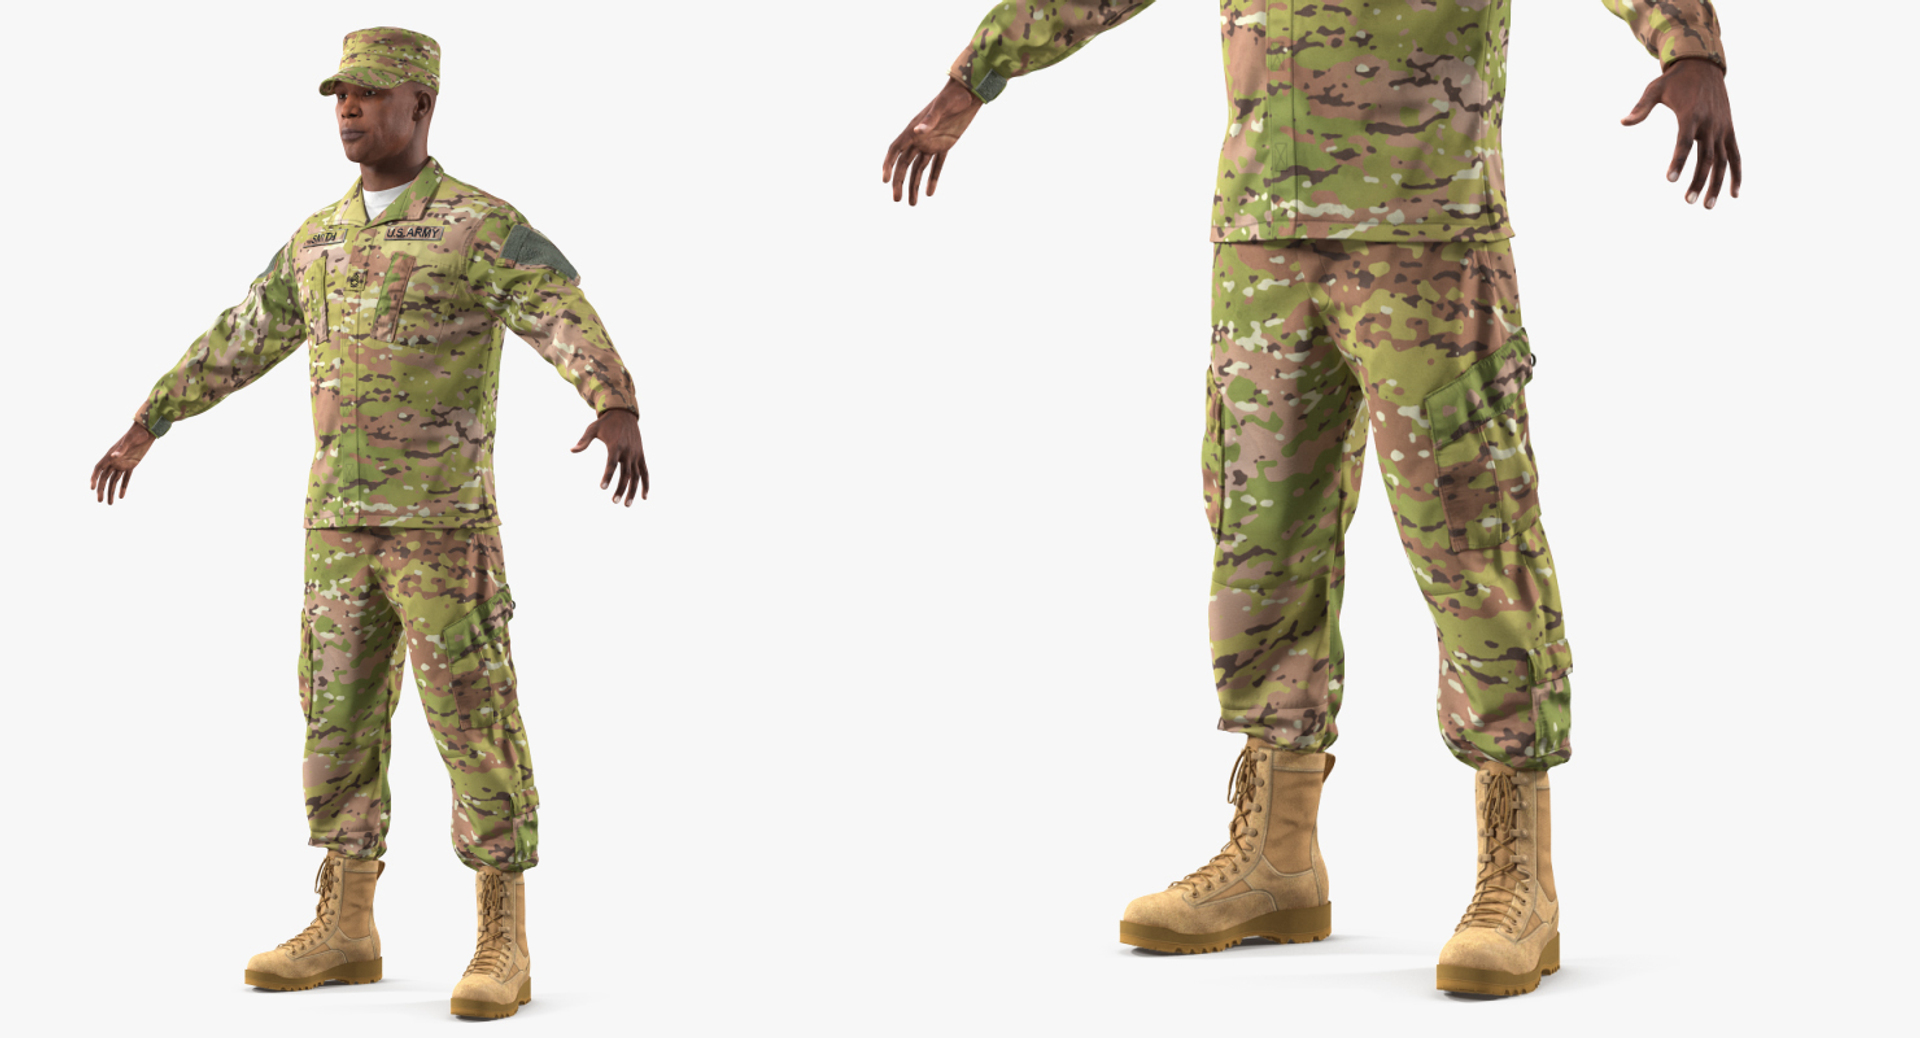 Army soldiers rigged 3D model - TurboSquid 1520911